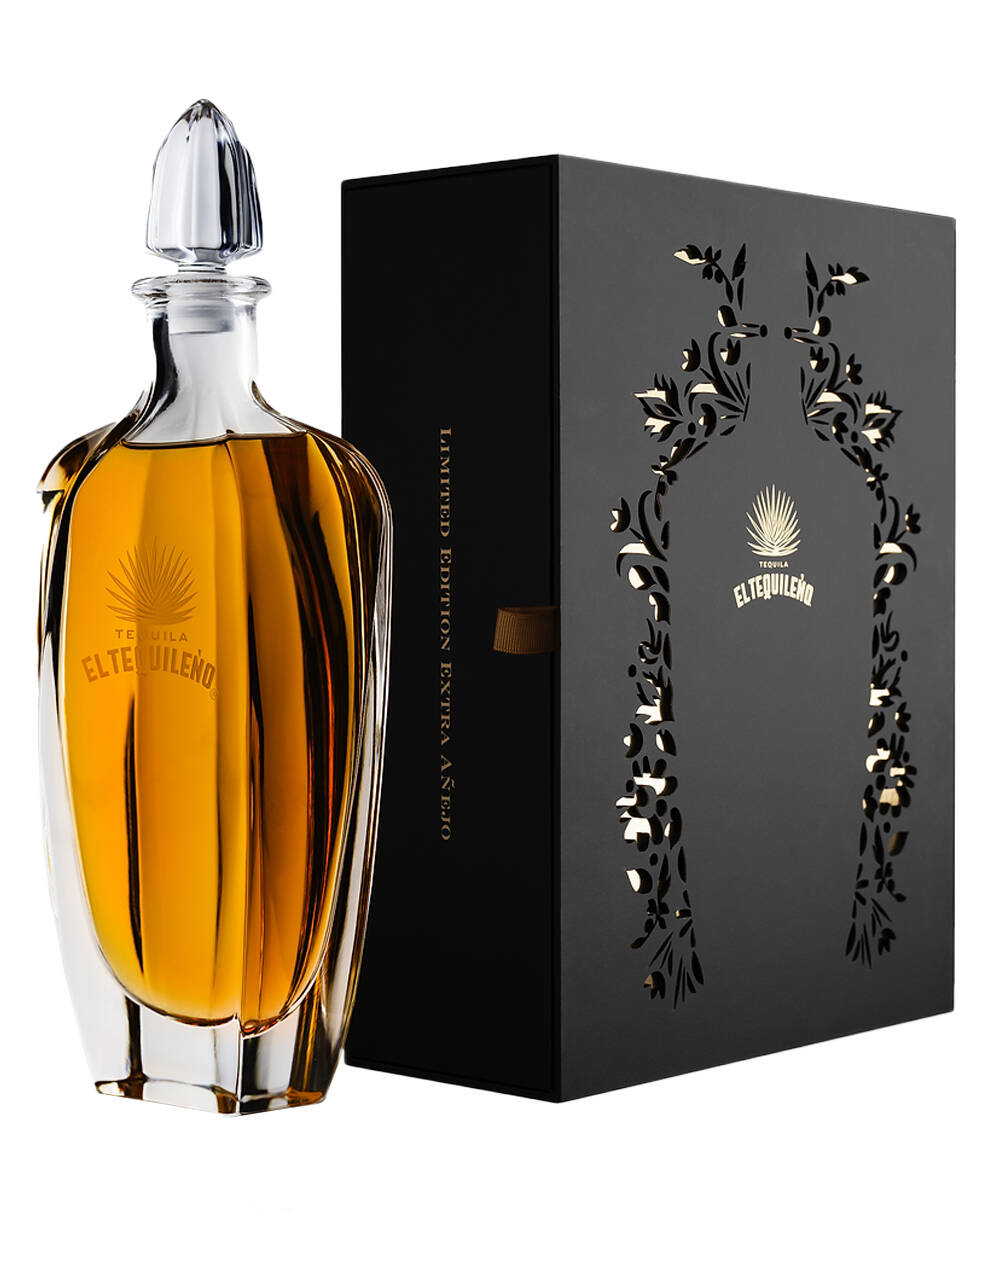 El Tequileno Extra Anejo Limited Edition Tequila